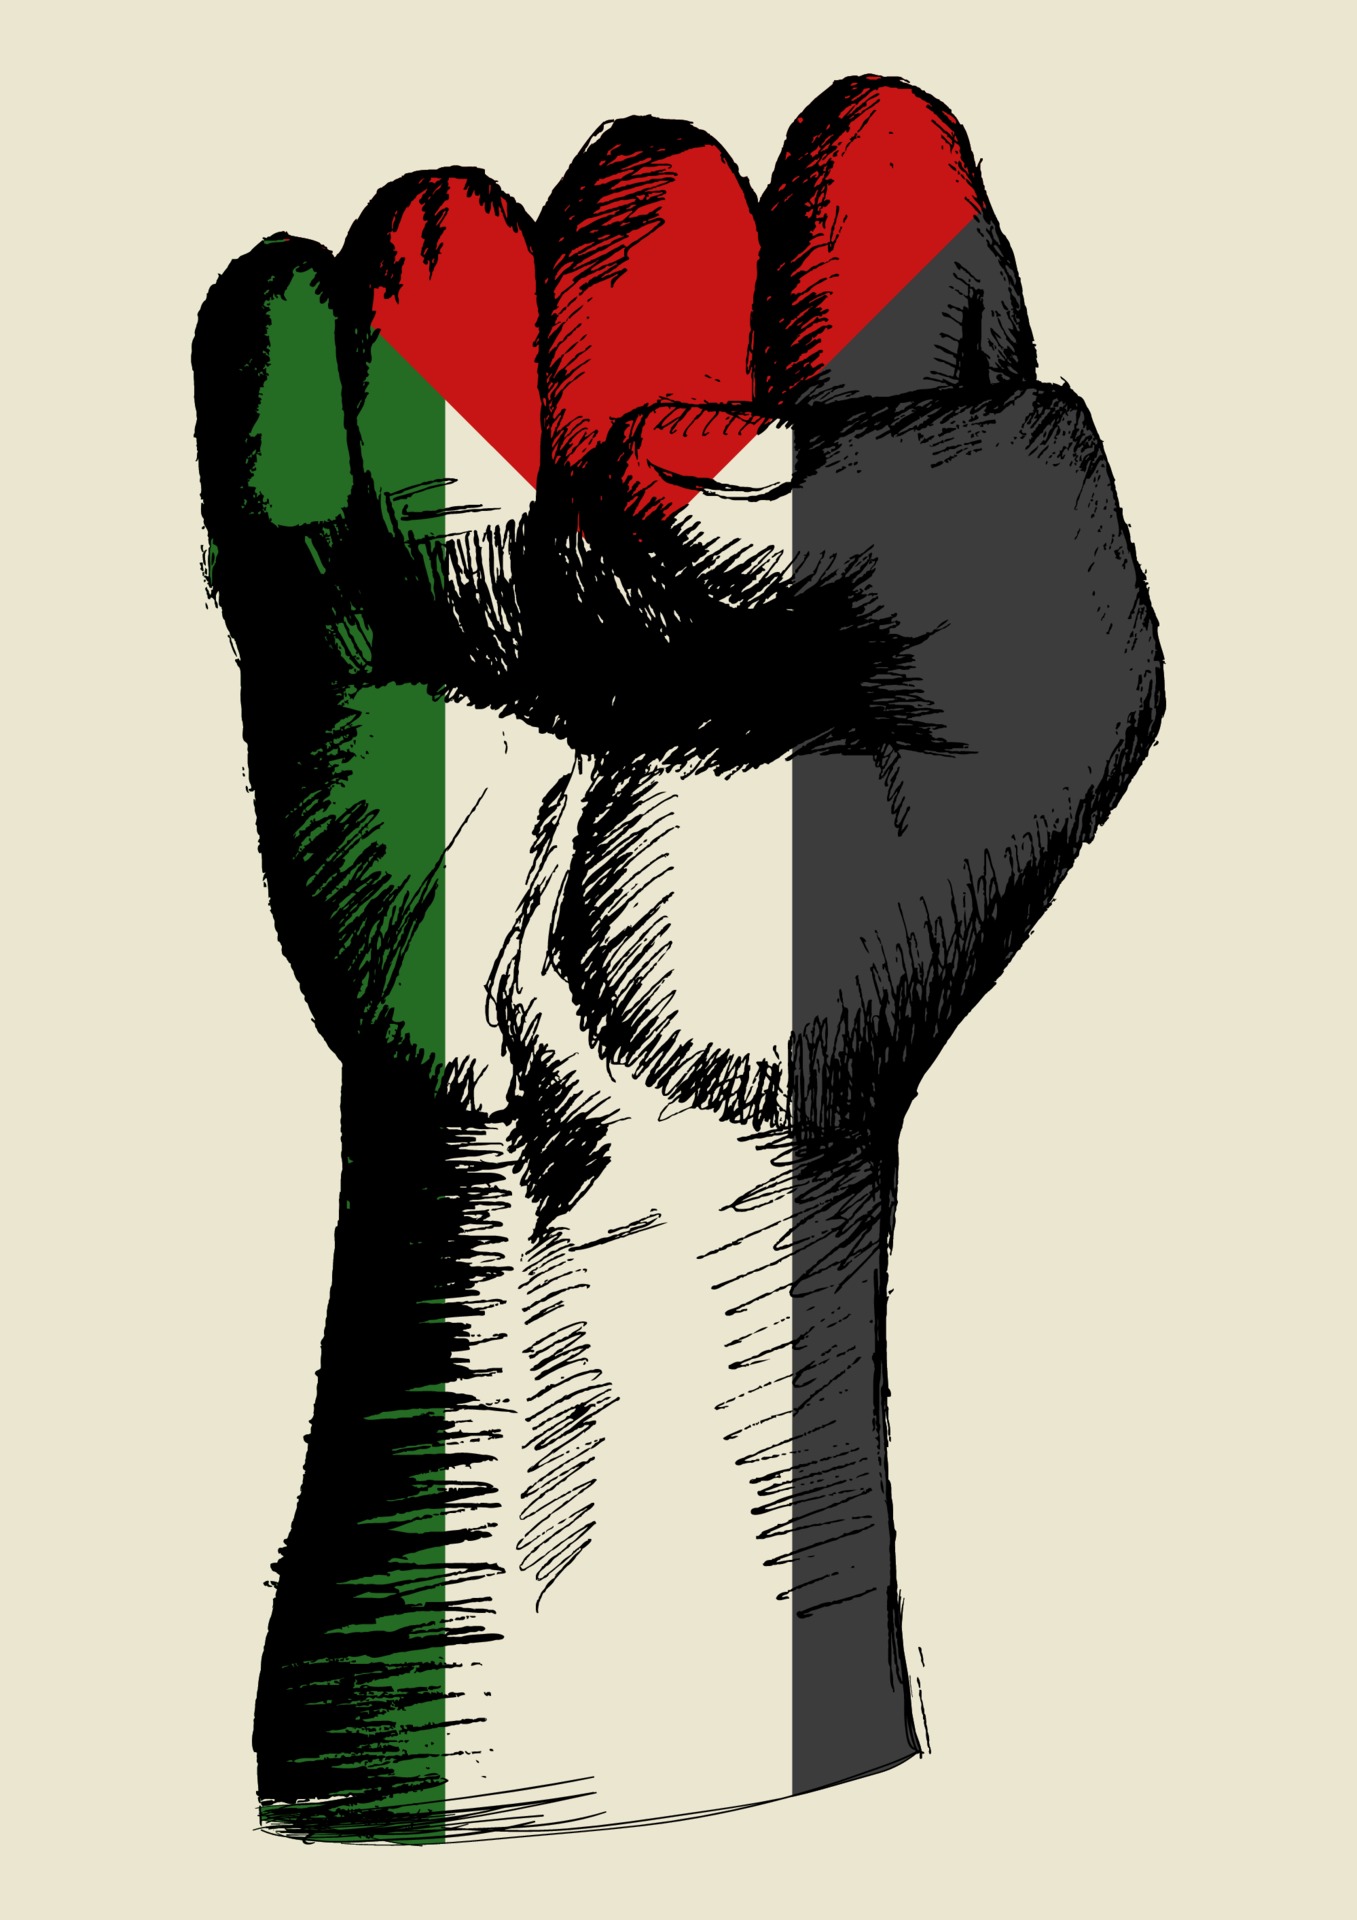 Sketch of a Rising Fist Resembling Palestine Flag